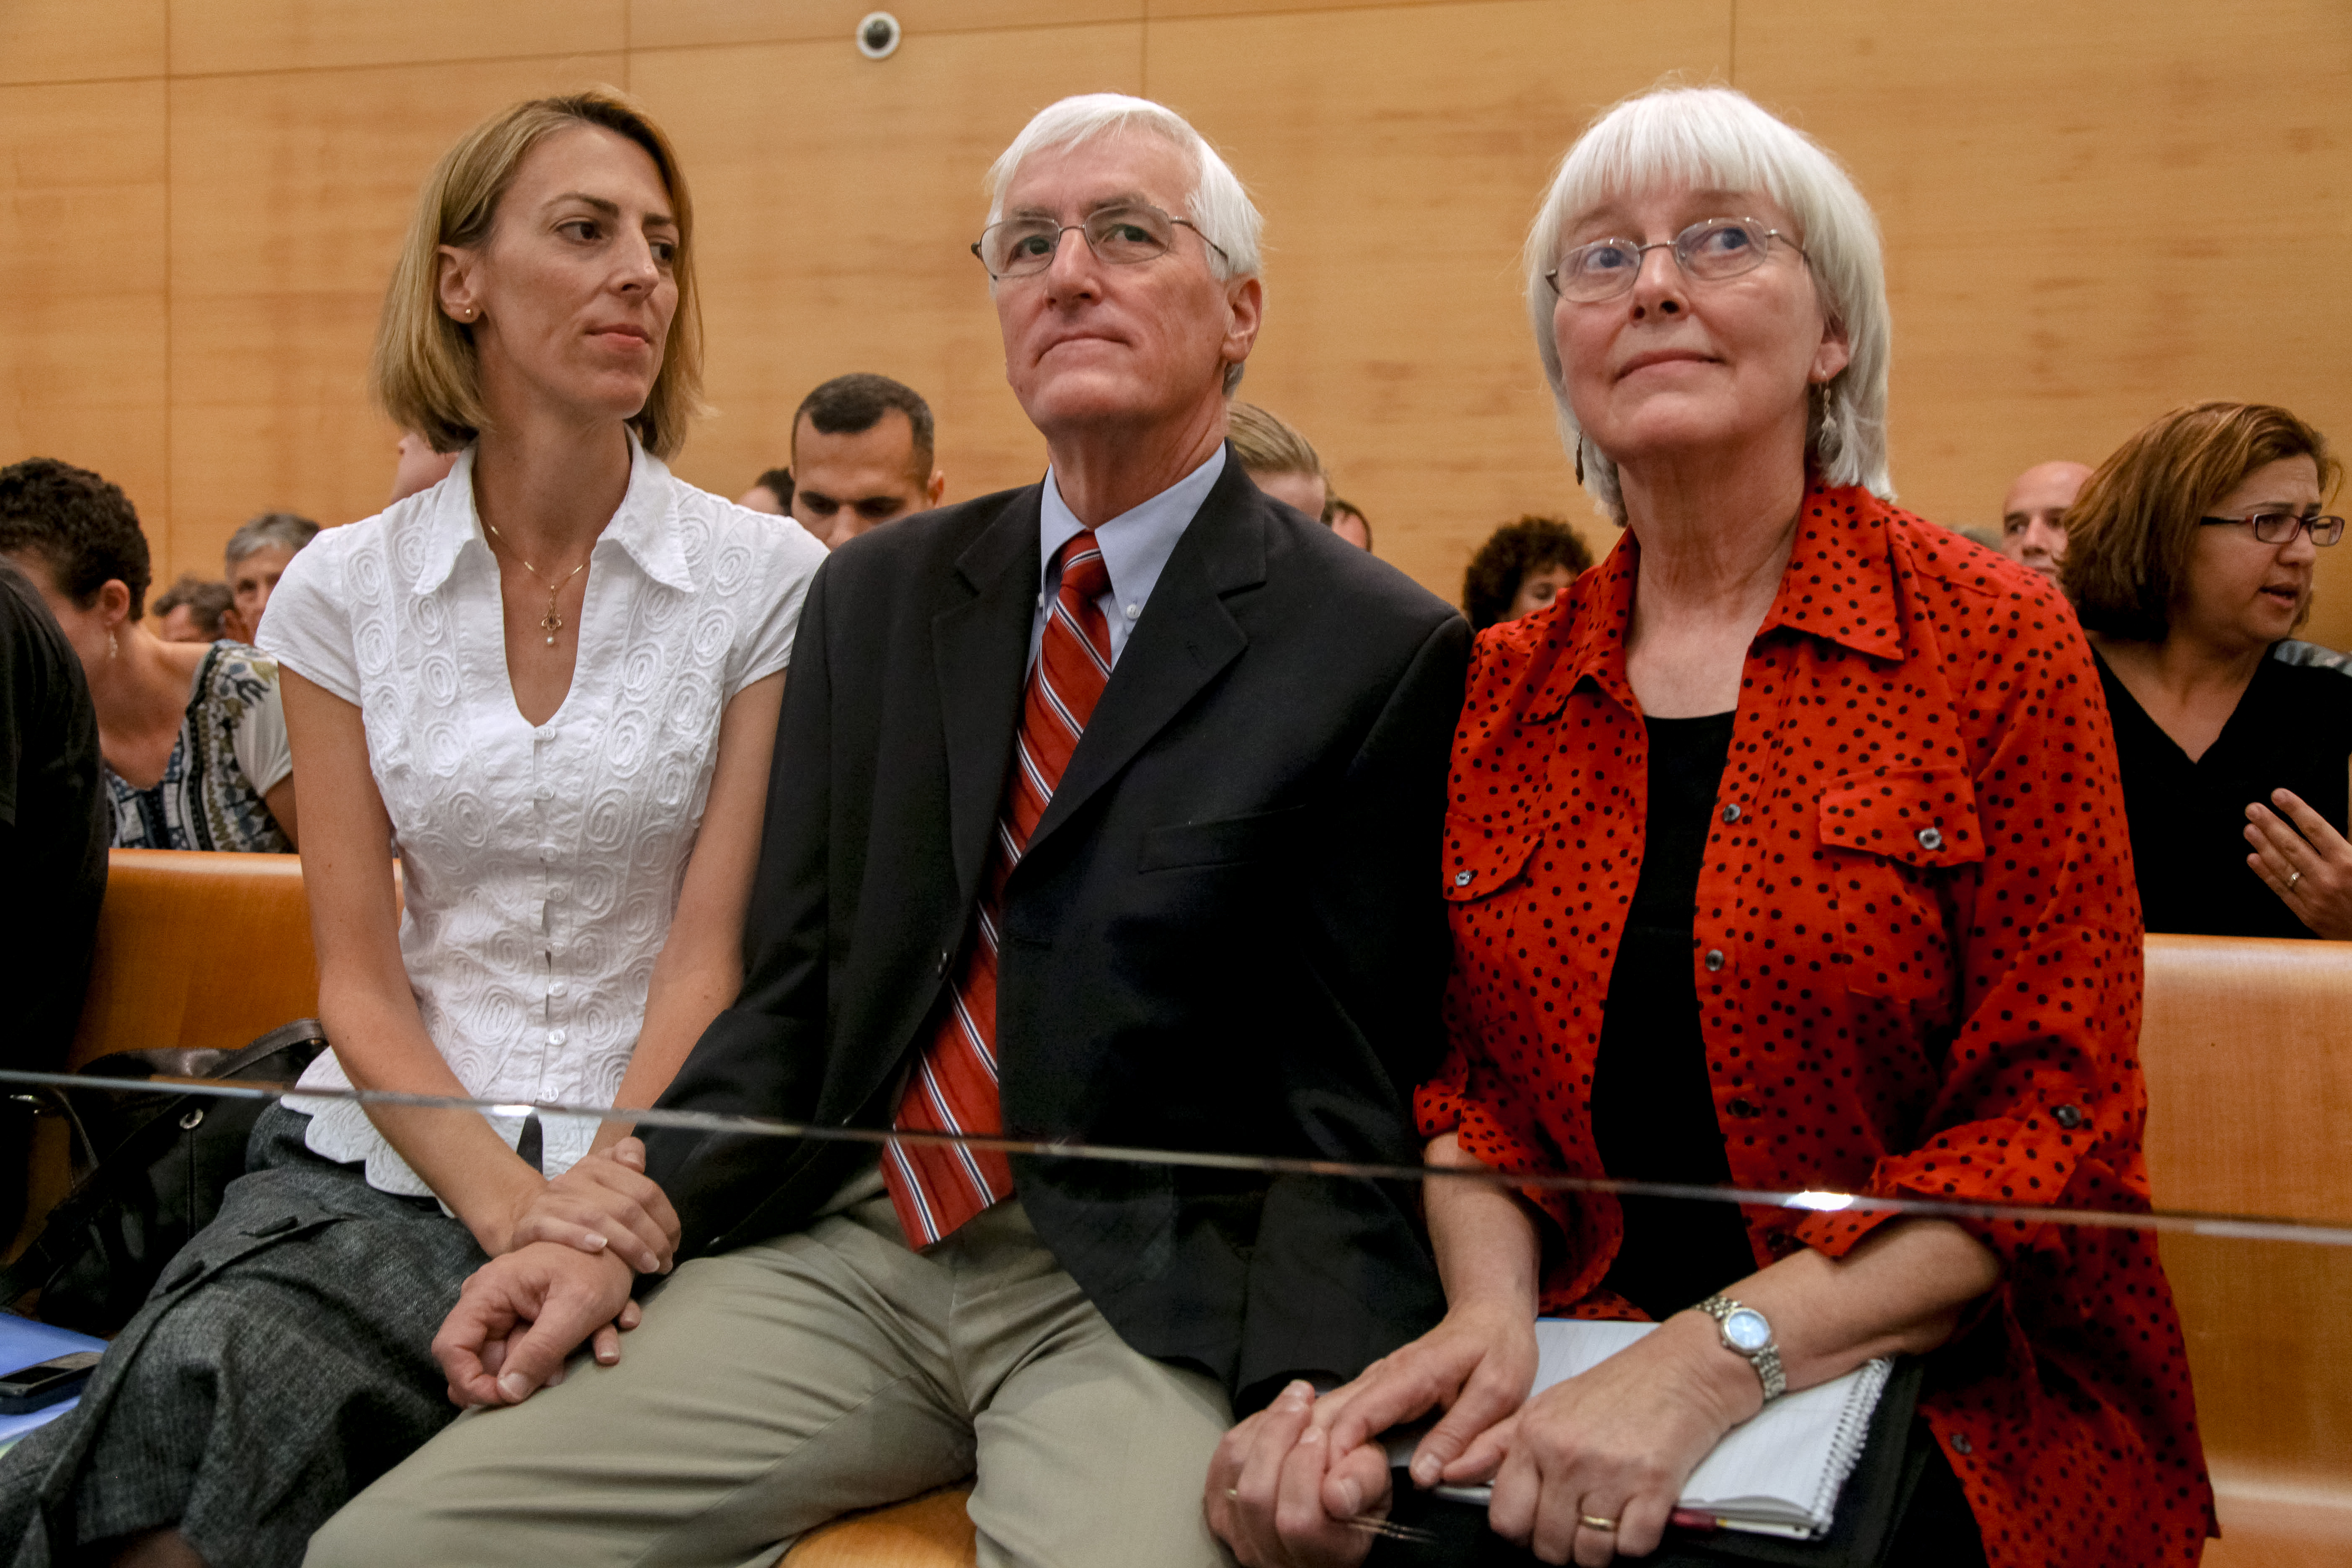 HAIFA, ISRAEL - 28 AUGUST:  (L-R) Sister Sarah Corrie, father Craig Corrie and mother Cindy Corrie of US peace activist Rachel Corrie sit in the Haifa District Court on August 28, 2012 in Haifa, Israel. 23-year-old Rachel Corrie was run over by an Israeli army bulldozer in Gaza in 2003. Judge Oded Gershon and the Israeli court have reached a verdict today statting that Israel is not to blame for her death and that it was a ''regrettable accident''.  (Photo by Avishag Shaar-Yashuv/Getty Images)